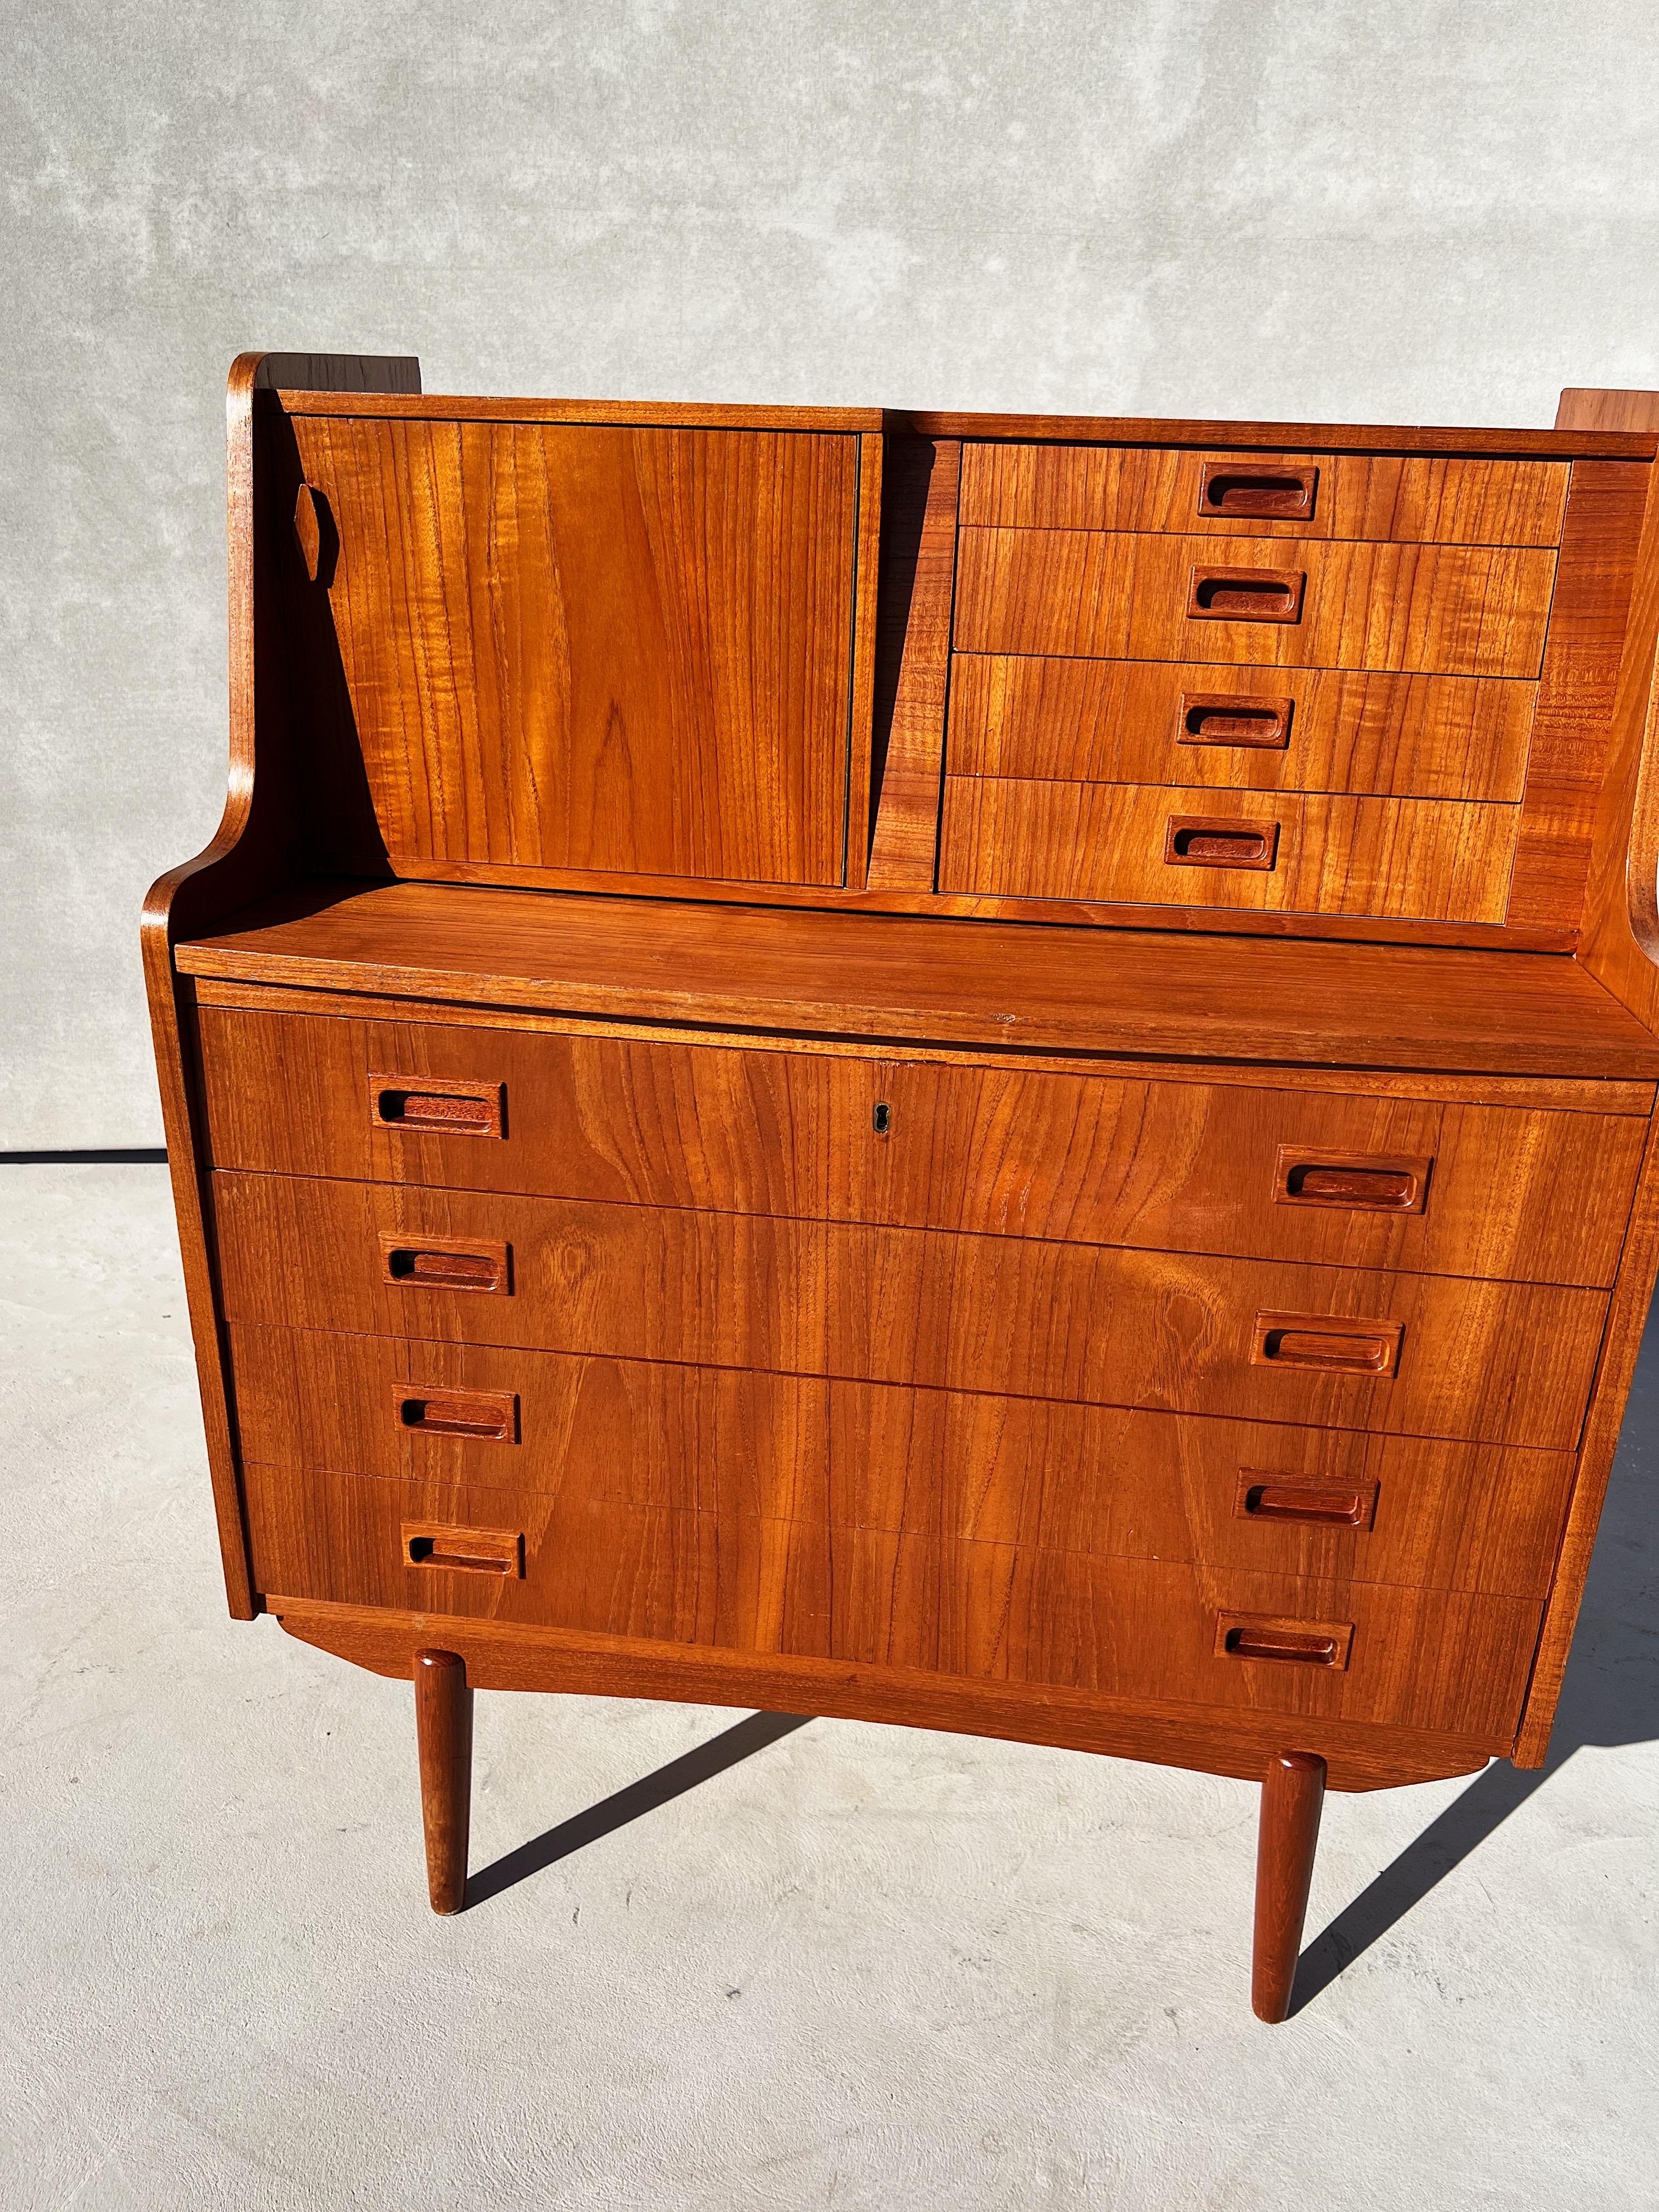 A newly refinished Danish teak desk or vanity 

This secrétaire is incredibly versatile with four small drawers, four large drawers, a small cabinet with inner shelving, a pullout writing desk shelf, even a hidden mirror 

Marked by maker on the